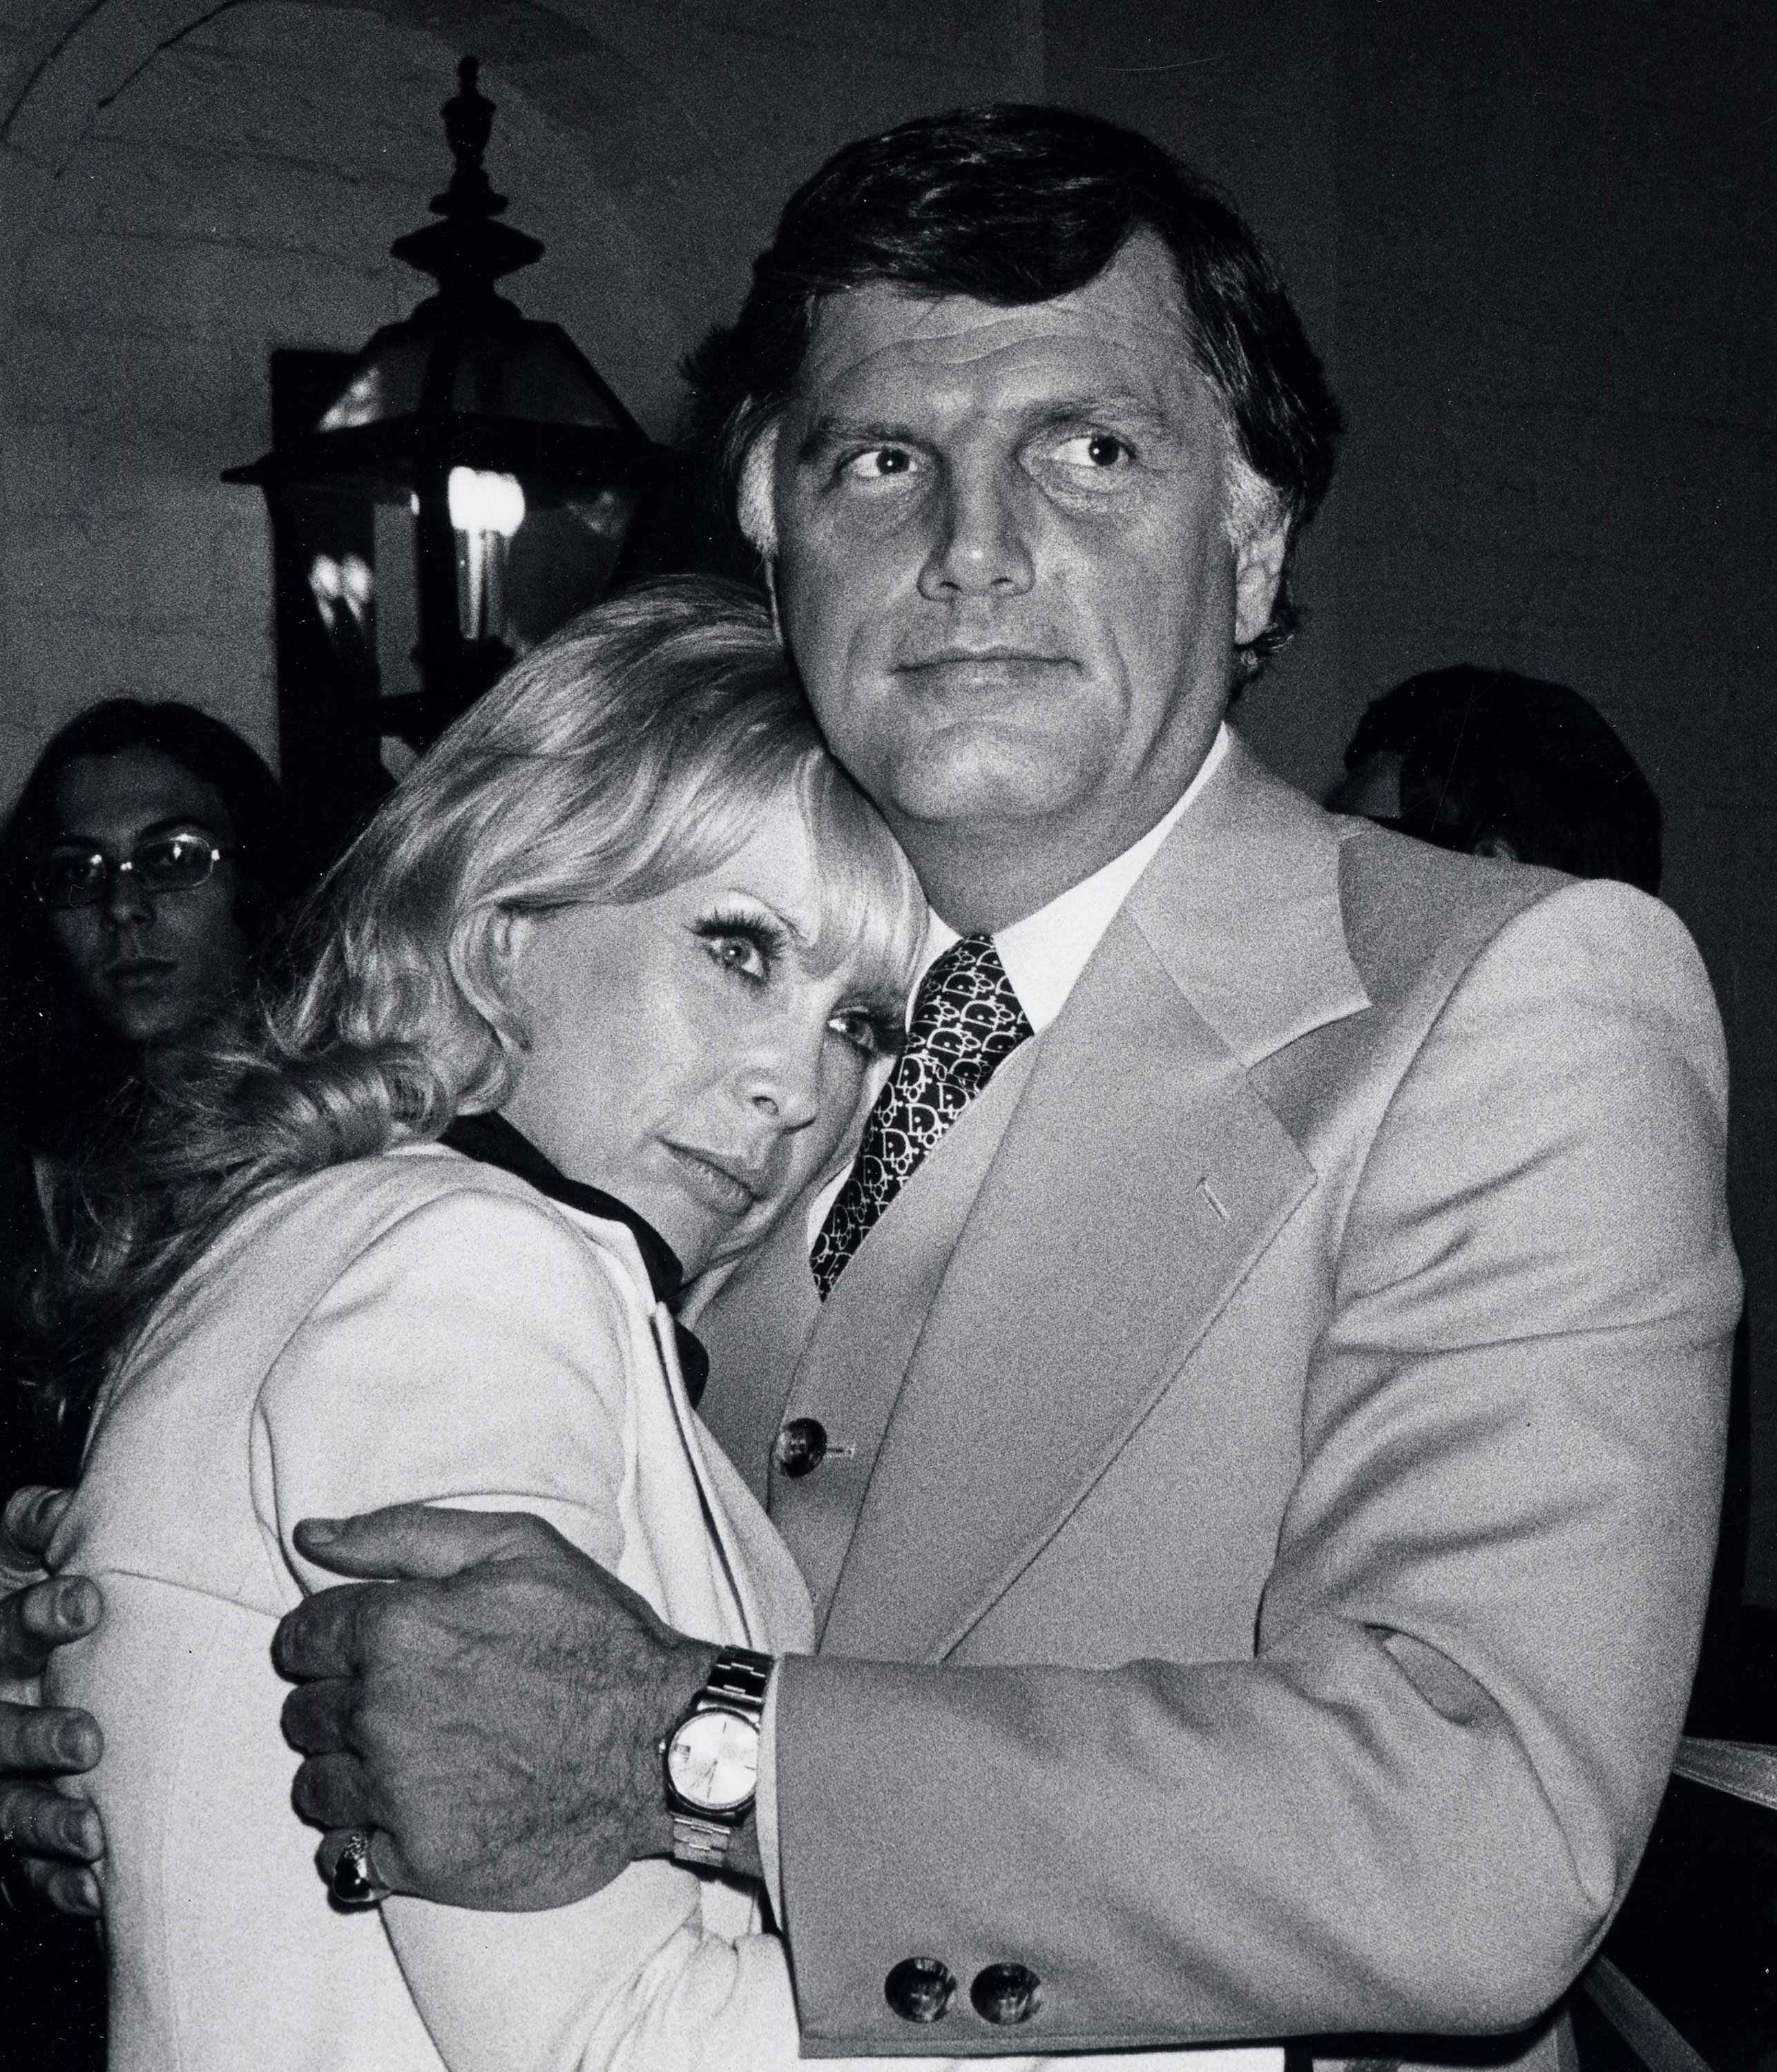 Barbara Eden and reporter Charles Fegert being photographed on March 26, 1976, at Chasen's Restaurant in Beverly Hills, California. | Source: Getty Images